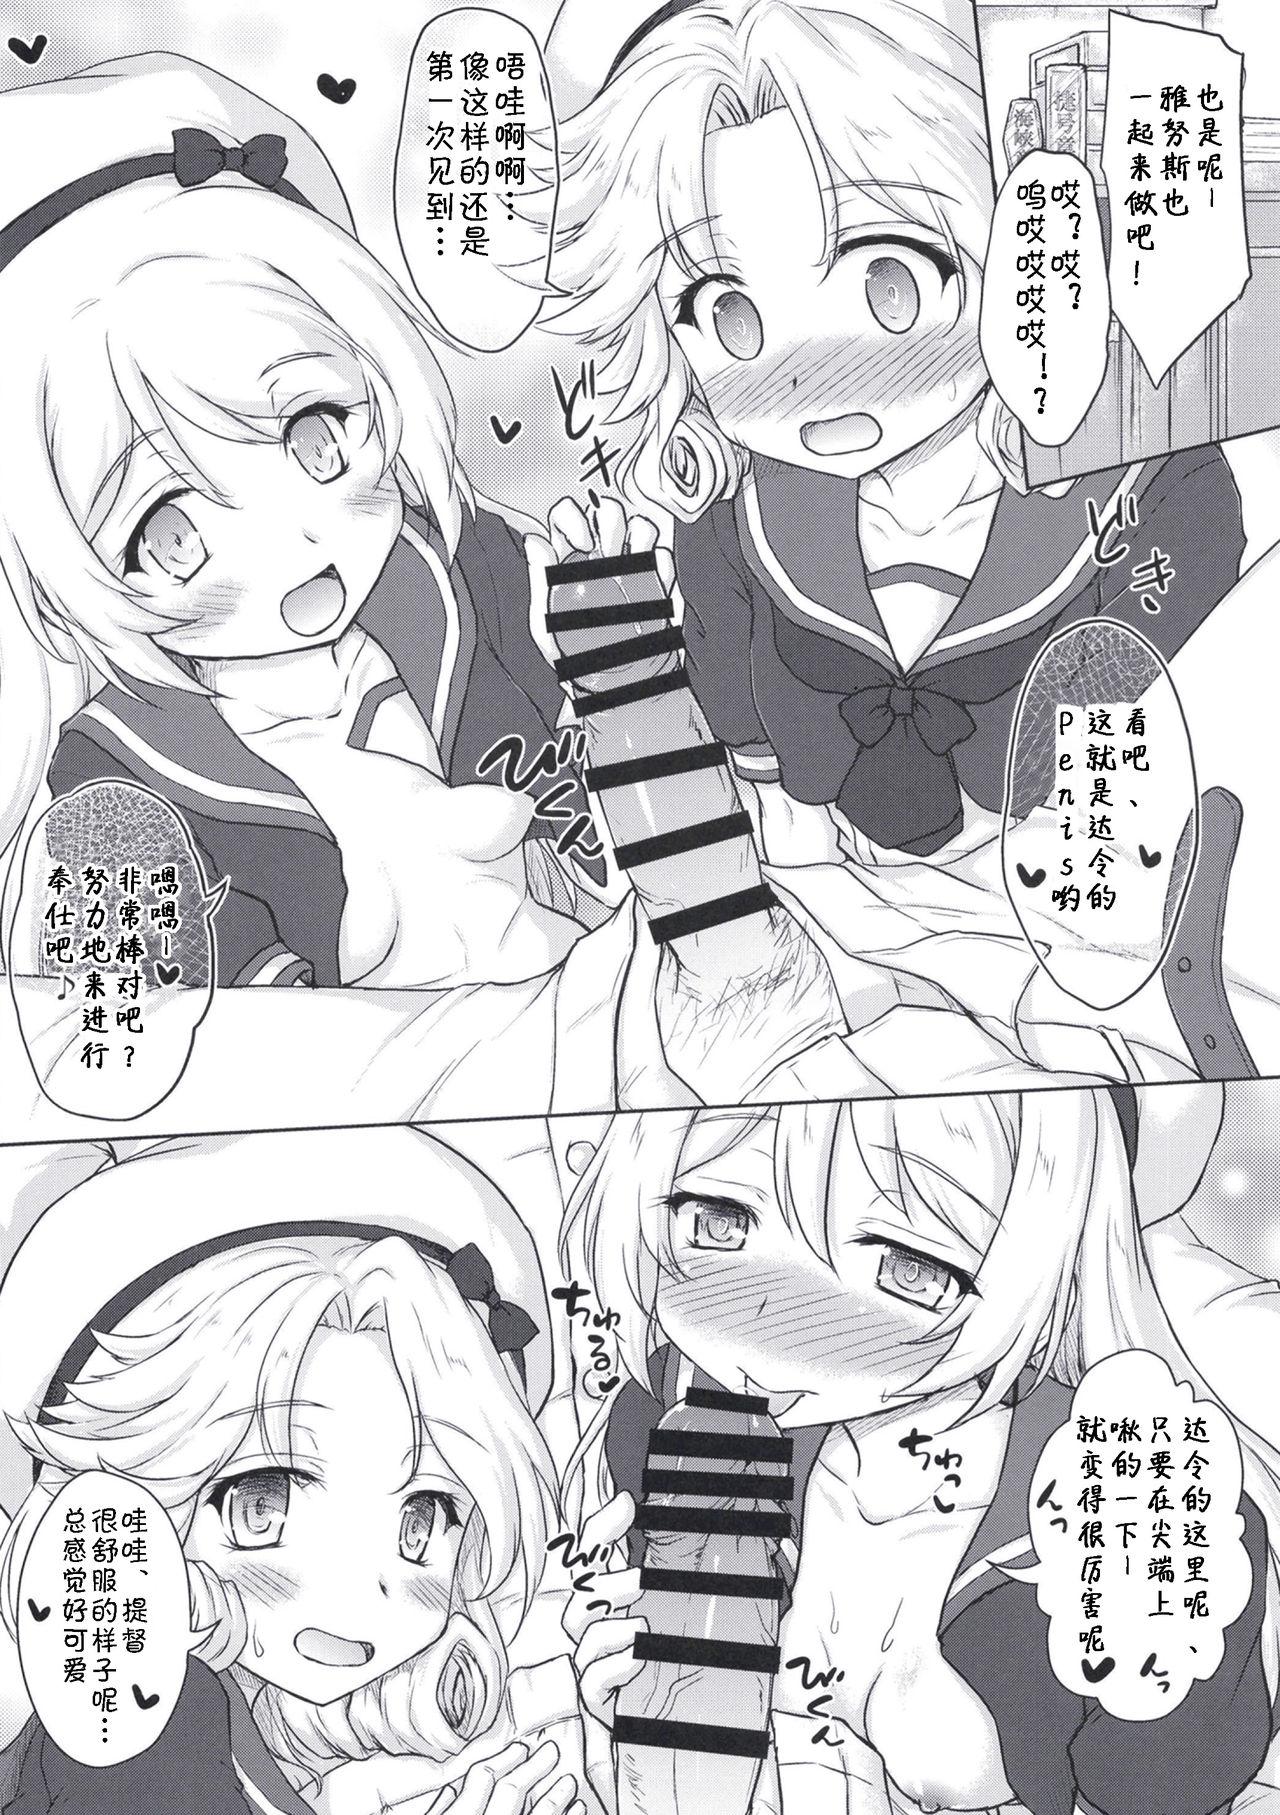 Cfnm Darling is in sight! act2 - Kantai collection Russia - Page 9